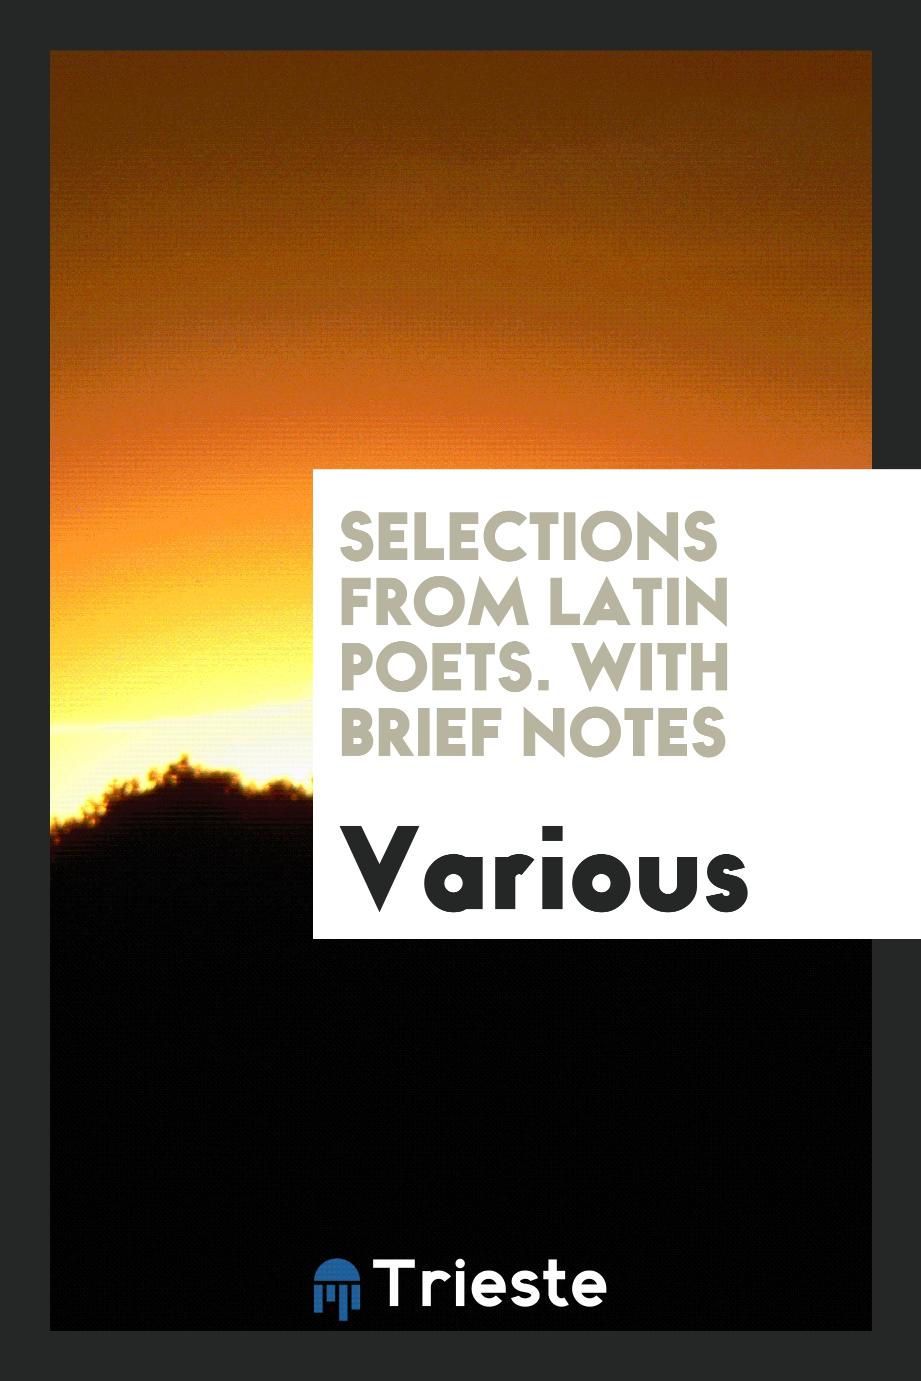 Selections from Latin Poets. With Brief Notes